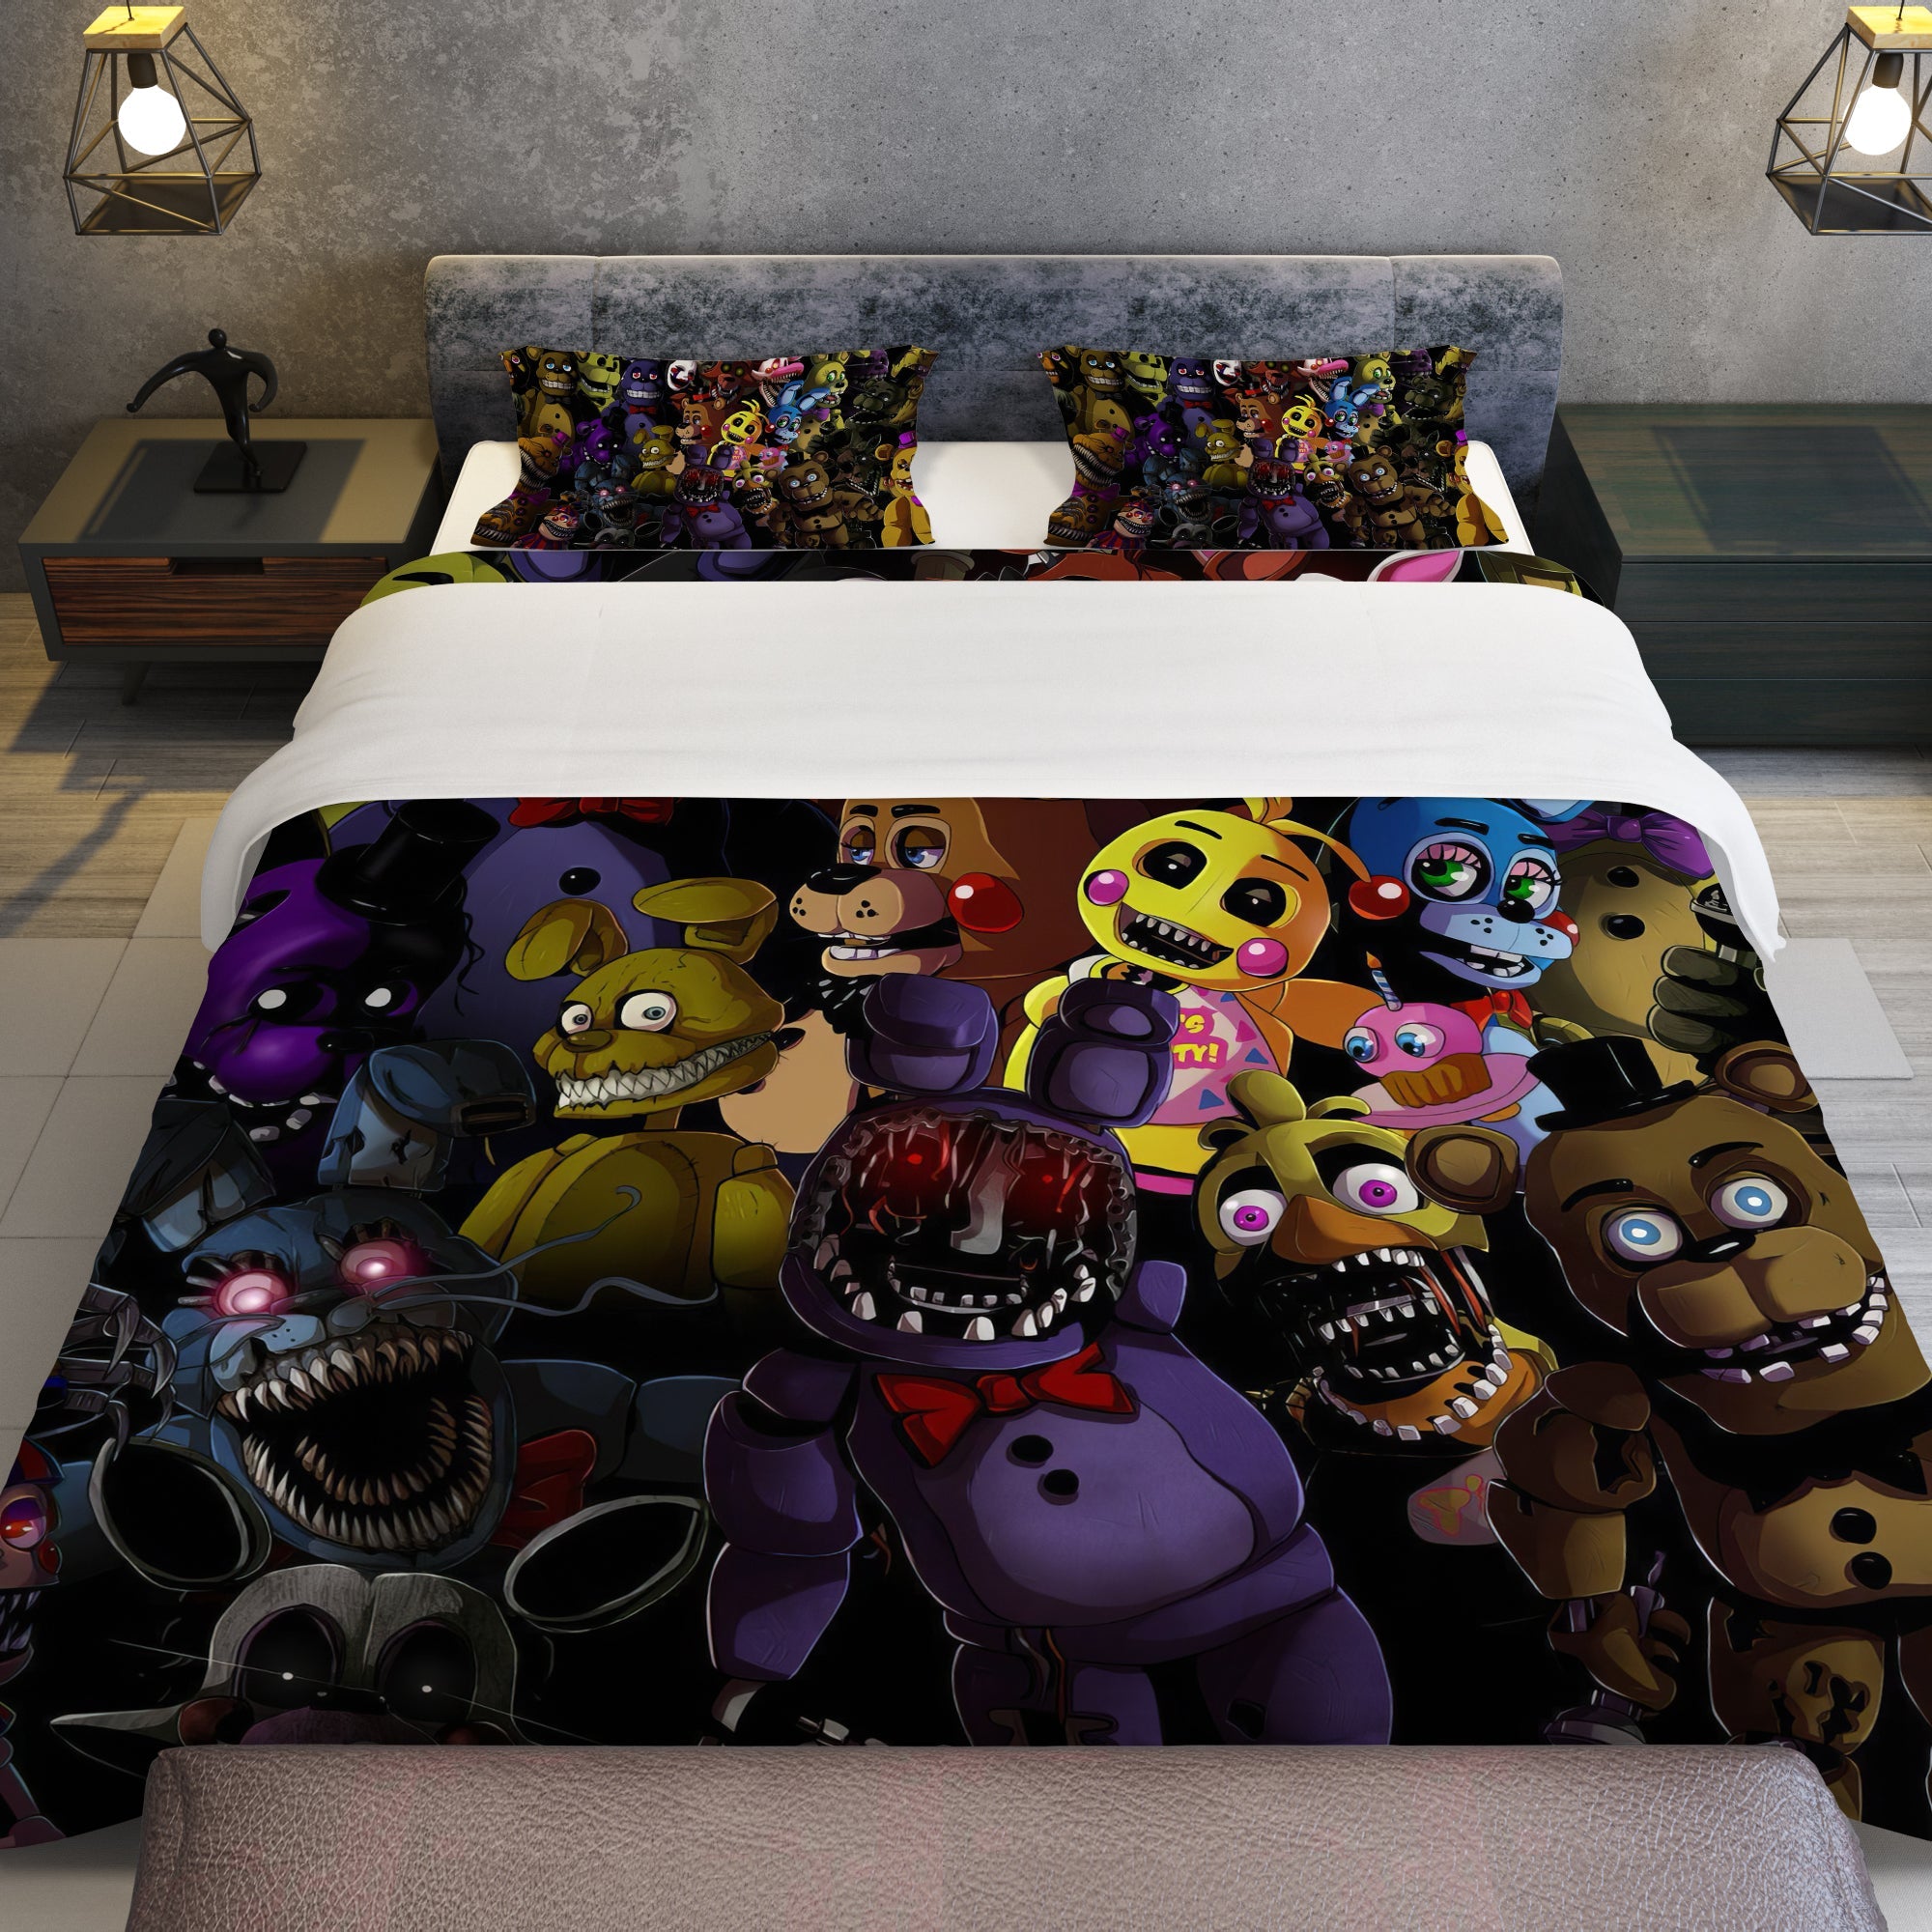 Withered Bonnie Bedding Set Five Nights At Freddy's Bedding Sheet Gifts